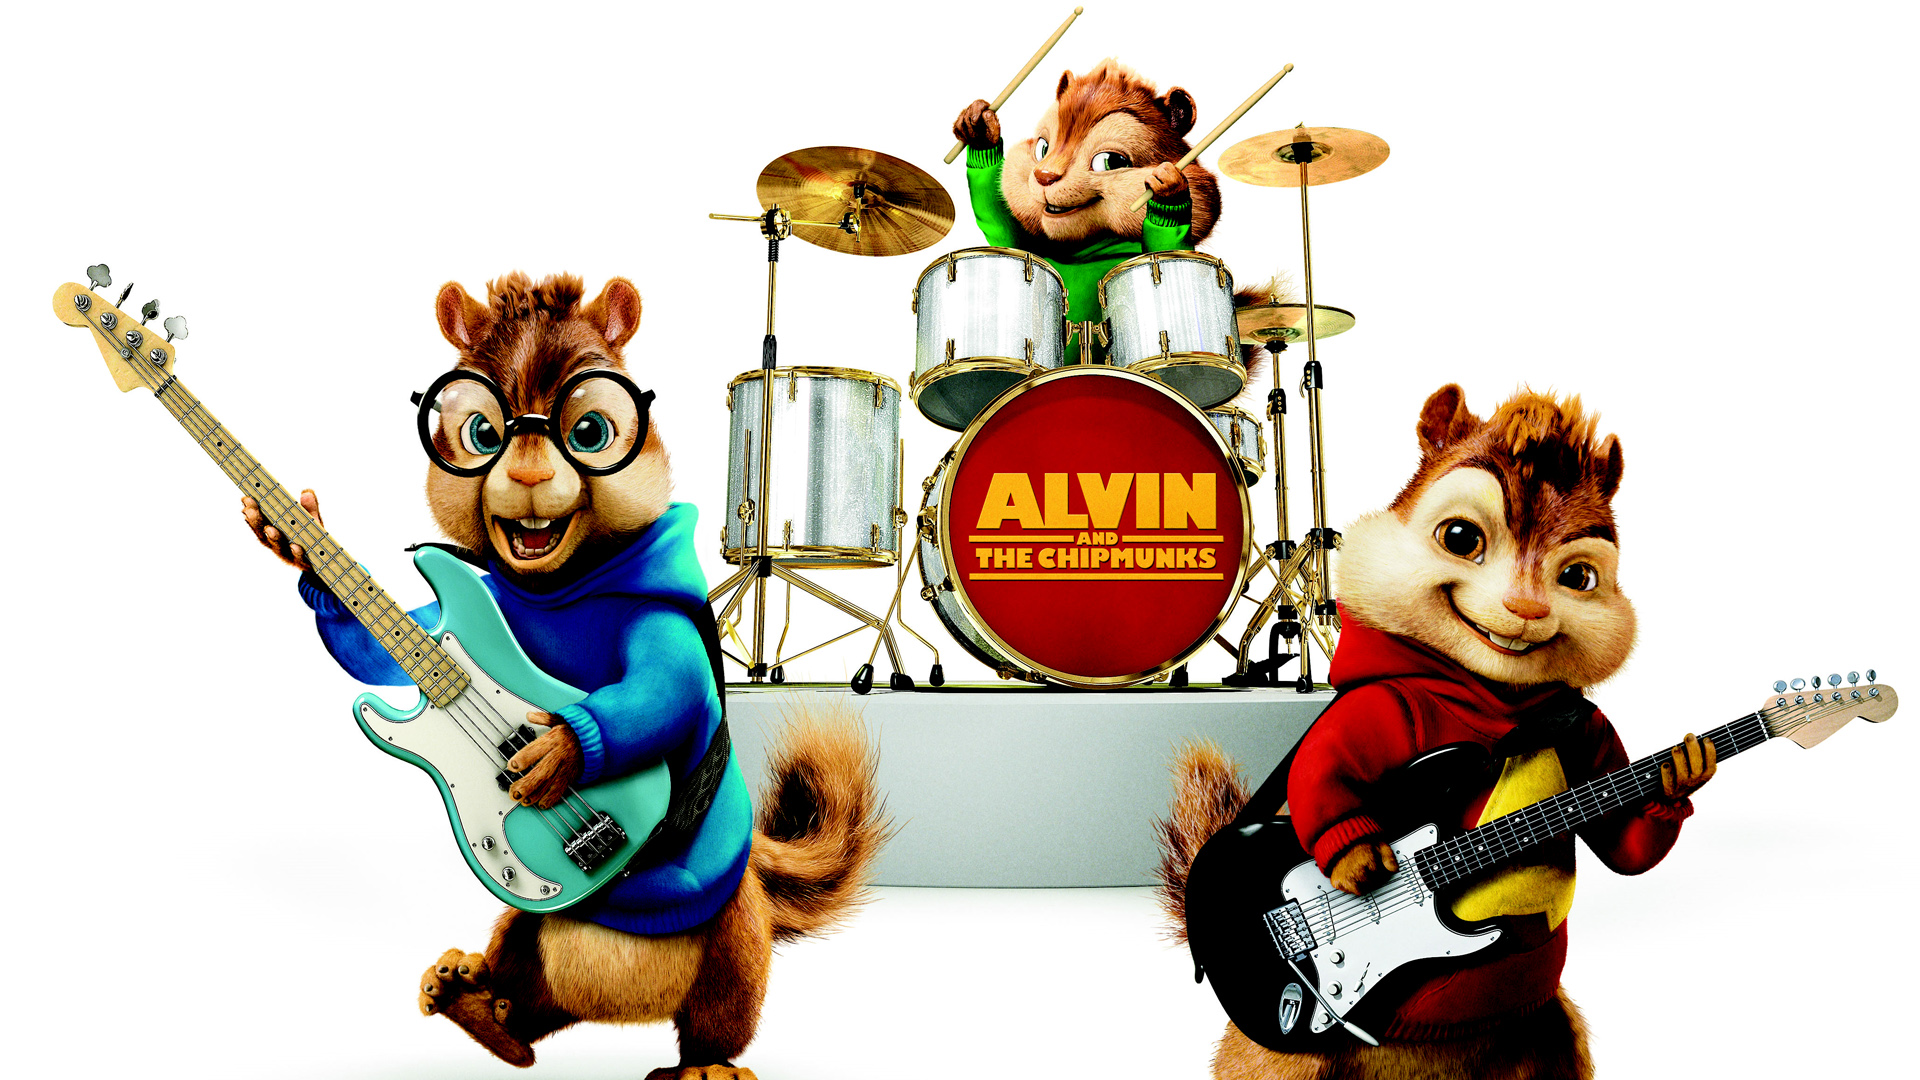 Movie Alvin and the Chipmunks HD Wallpaper | Background Image